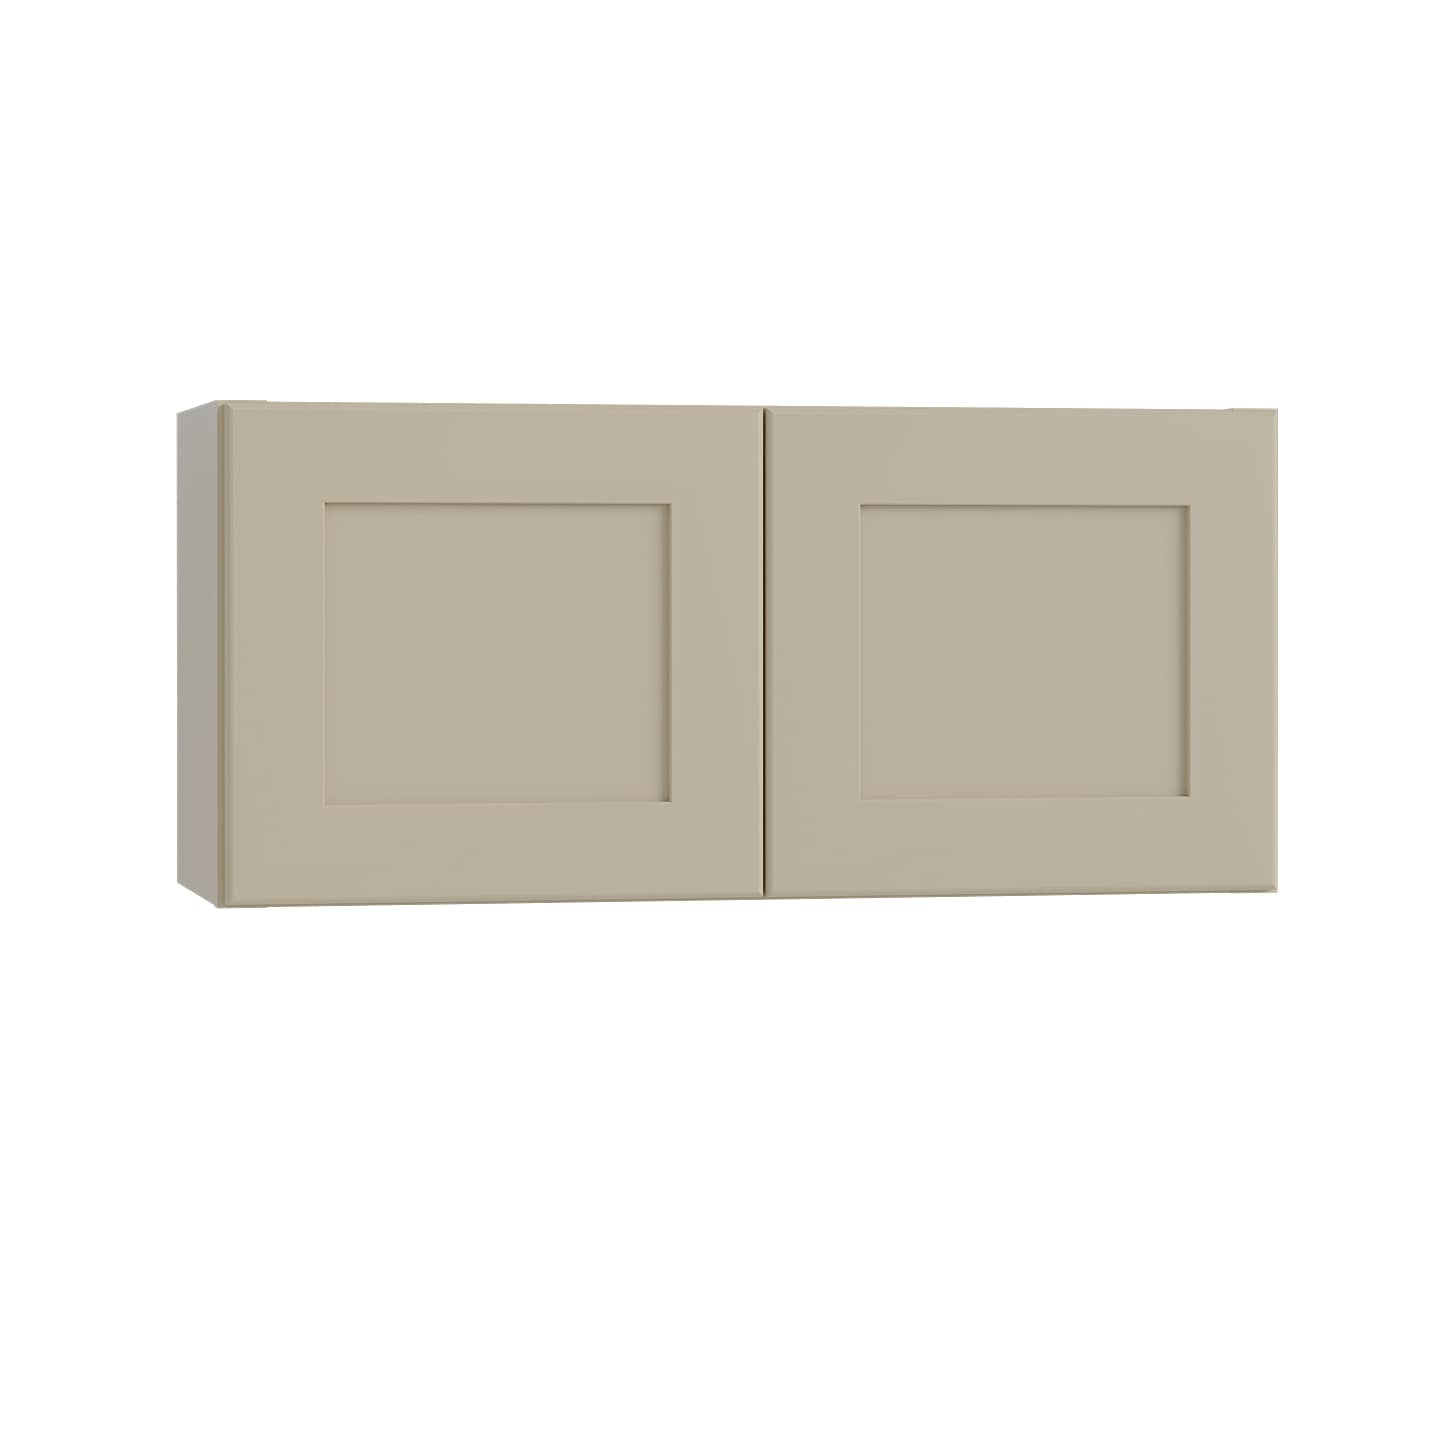 Luxxe Cabinetry 30-in W x 15-in H x 12-in D Norfolk Blended Cream Painted Door Wall Fully Assembled Semi-custom Cabinet in Off-White | W3015-NBC